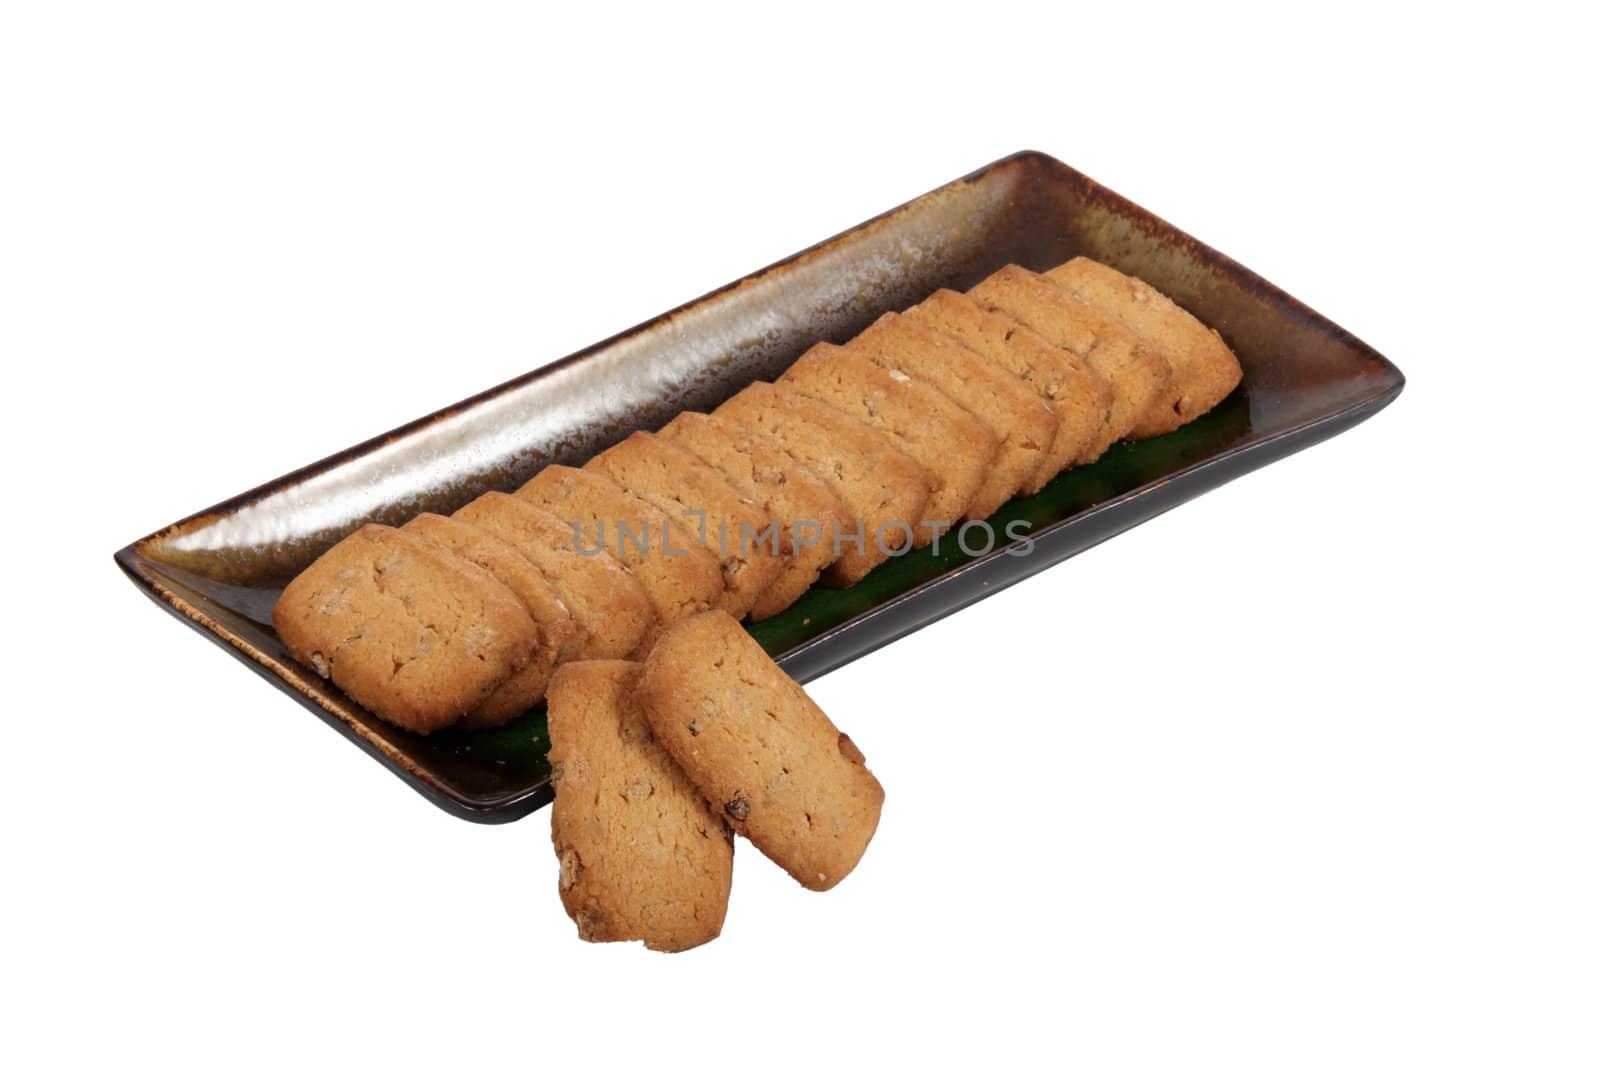 Tray of biscuits